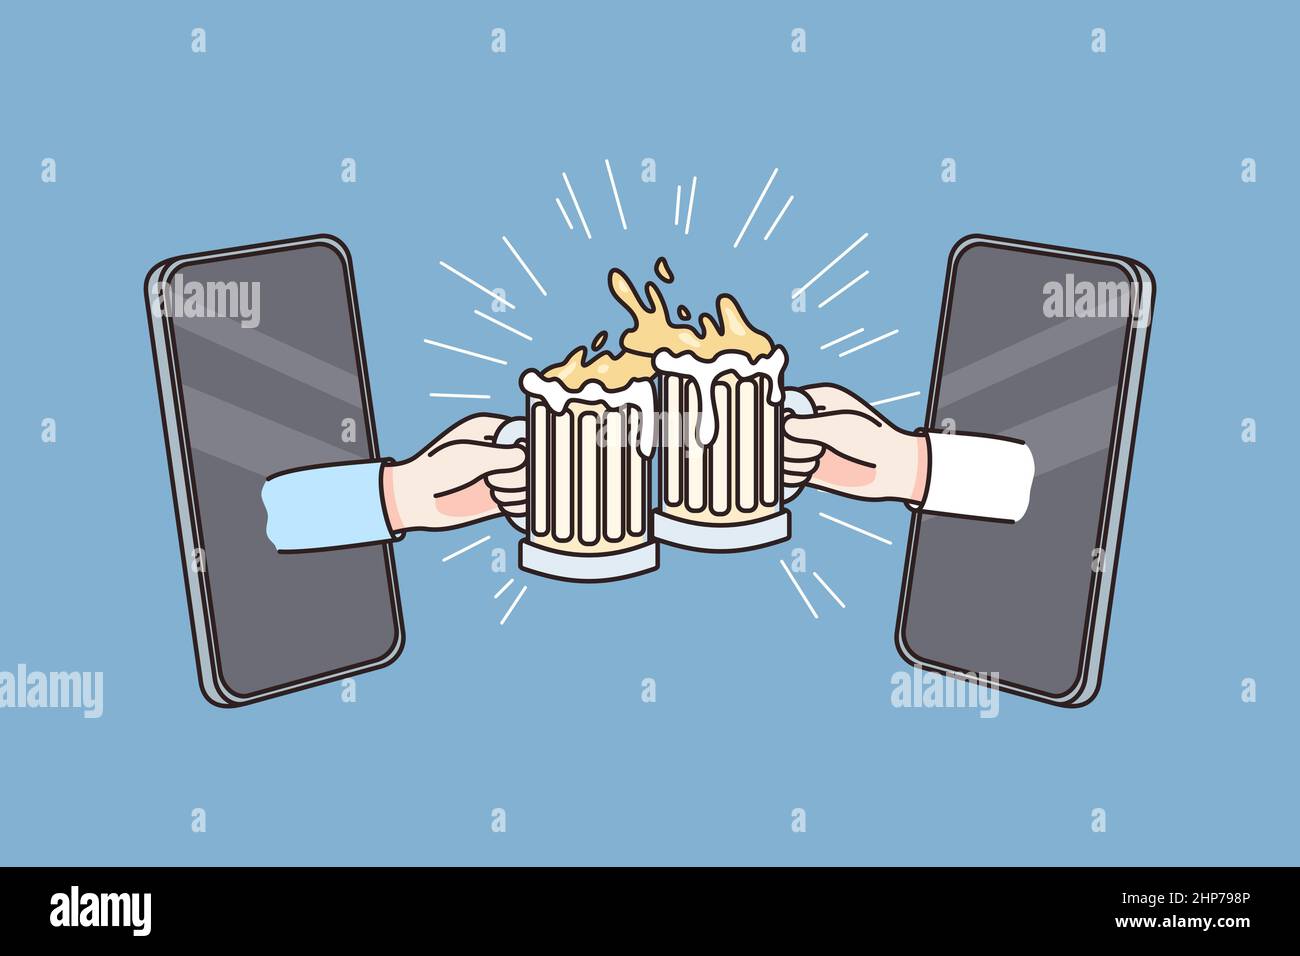 Online party and celebration concept. Stock Vector